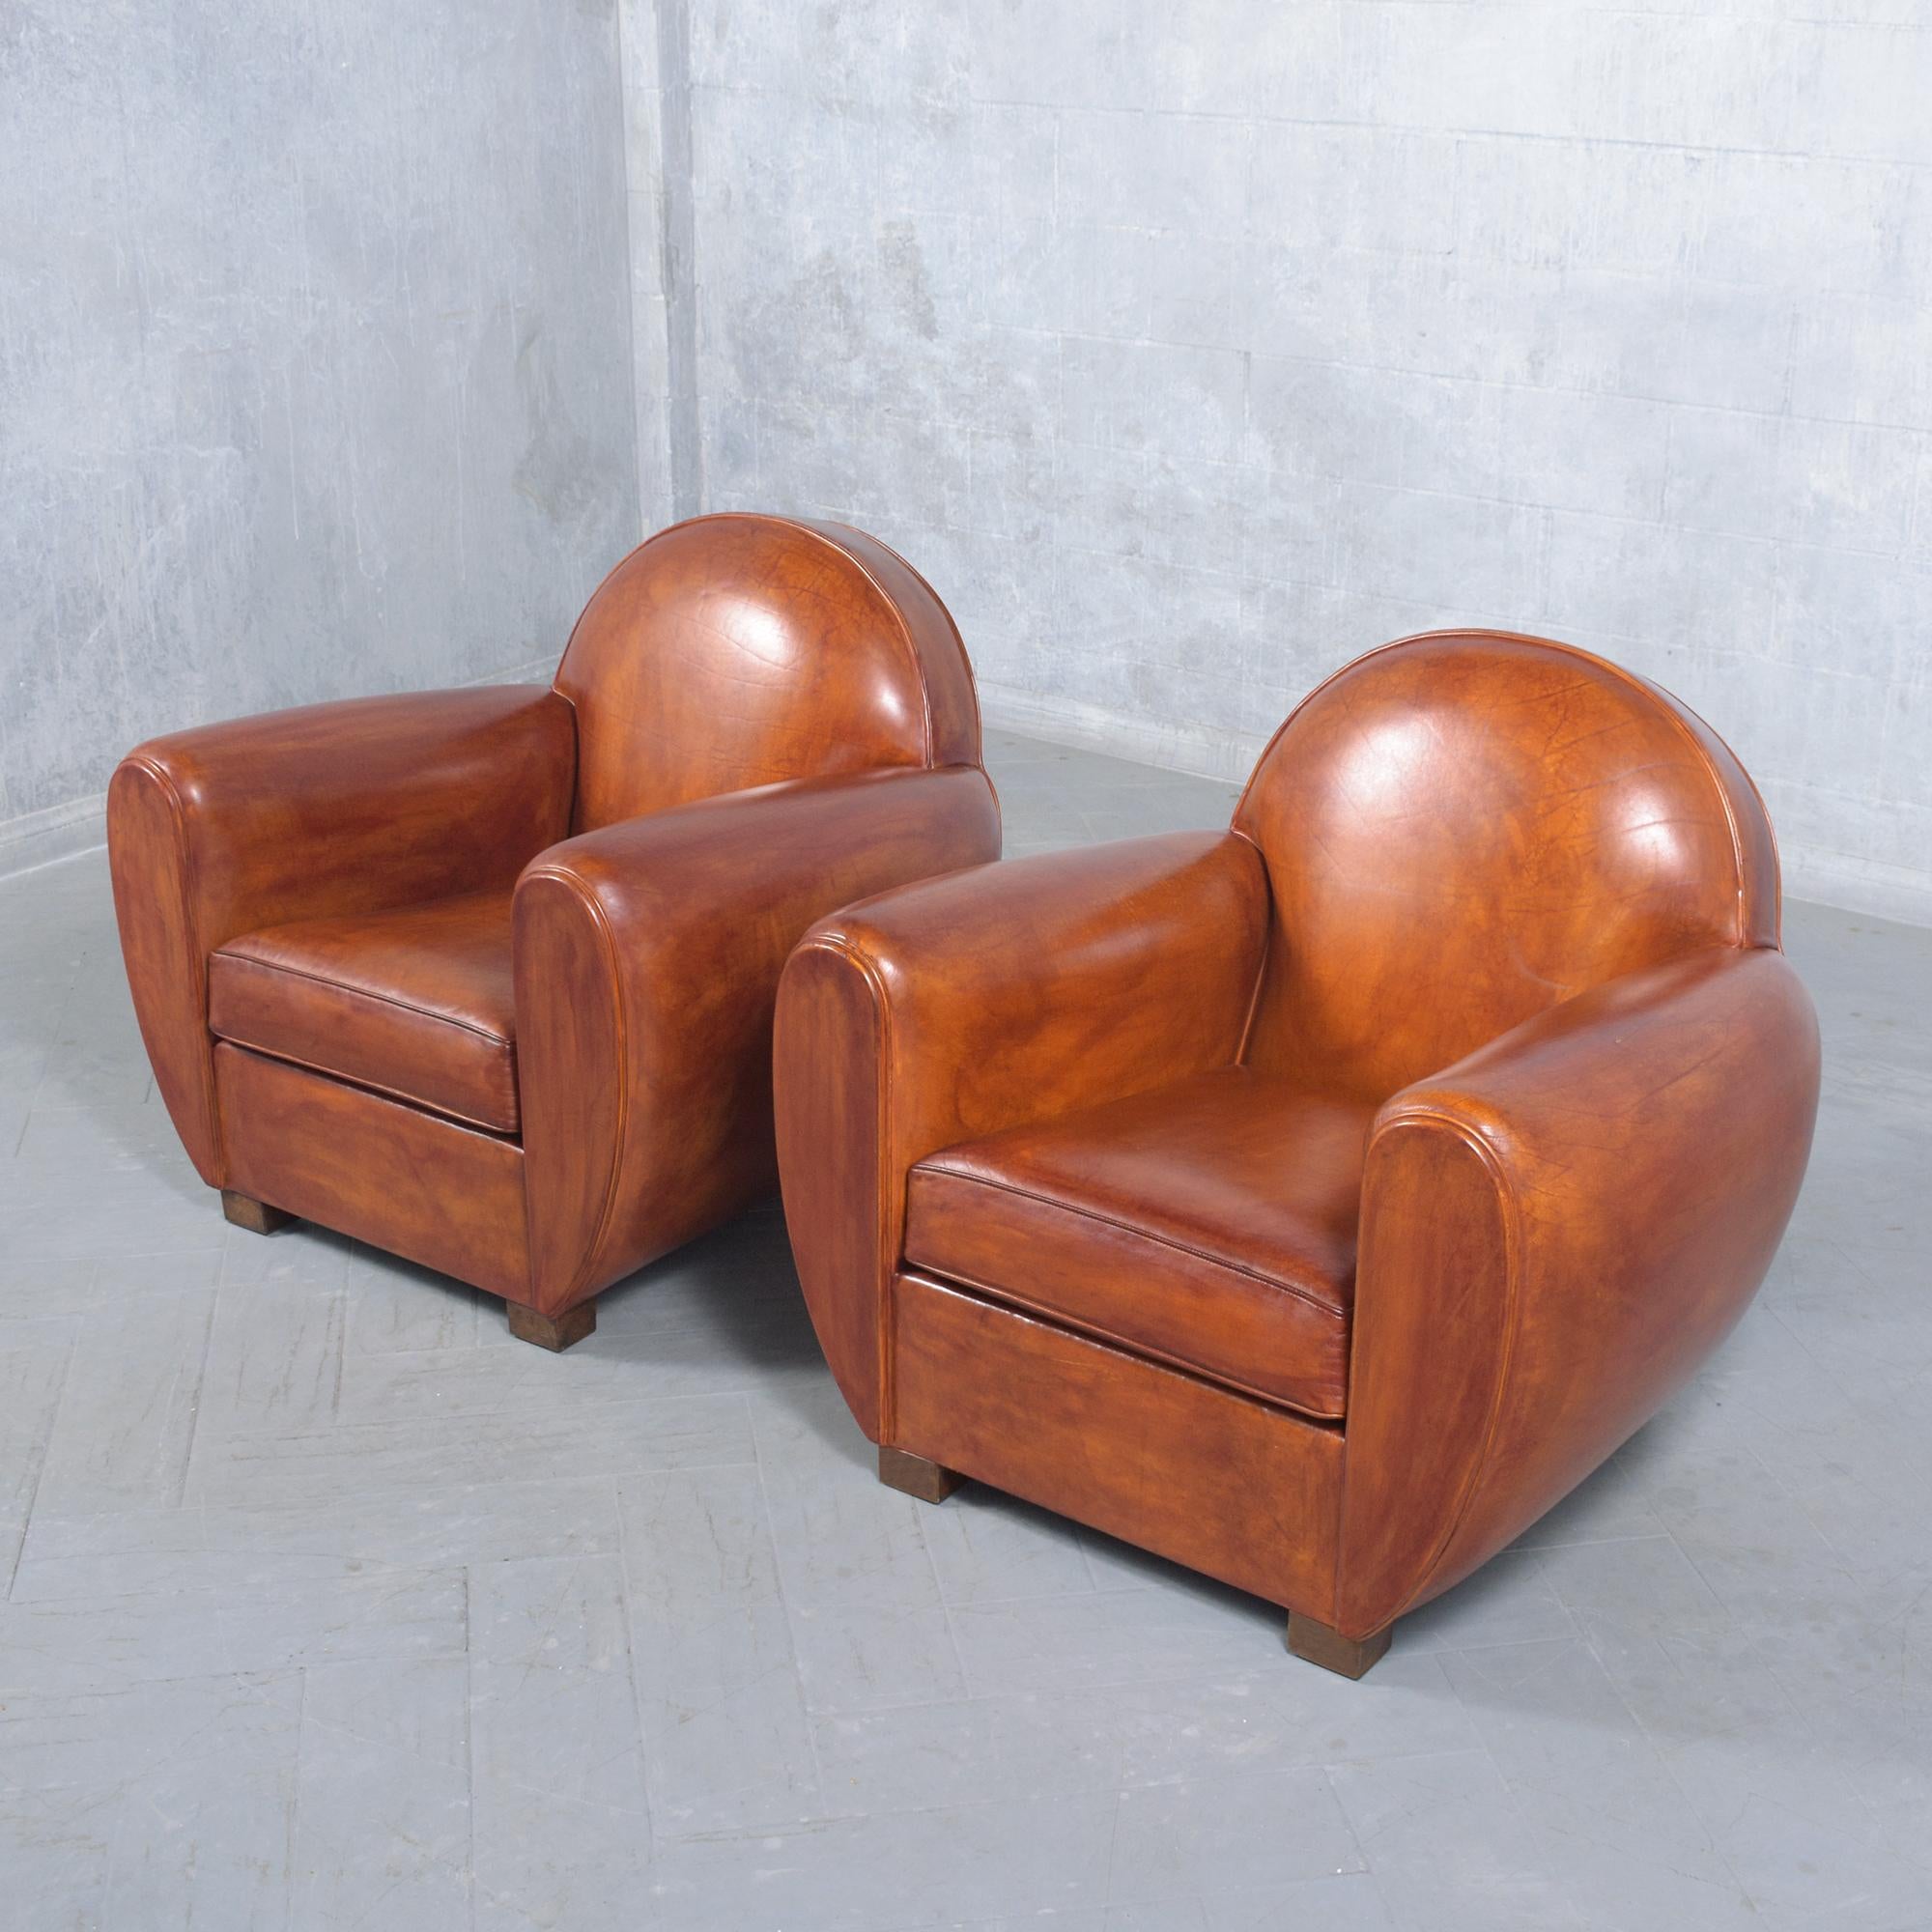 Mid-20th Century Restored Art Deco Club Chairs: 1960s French Deco Elegance For Sale